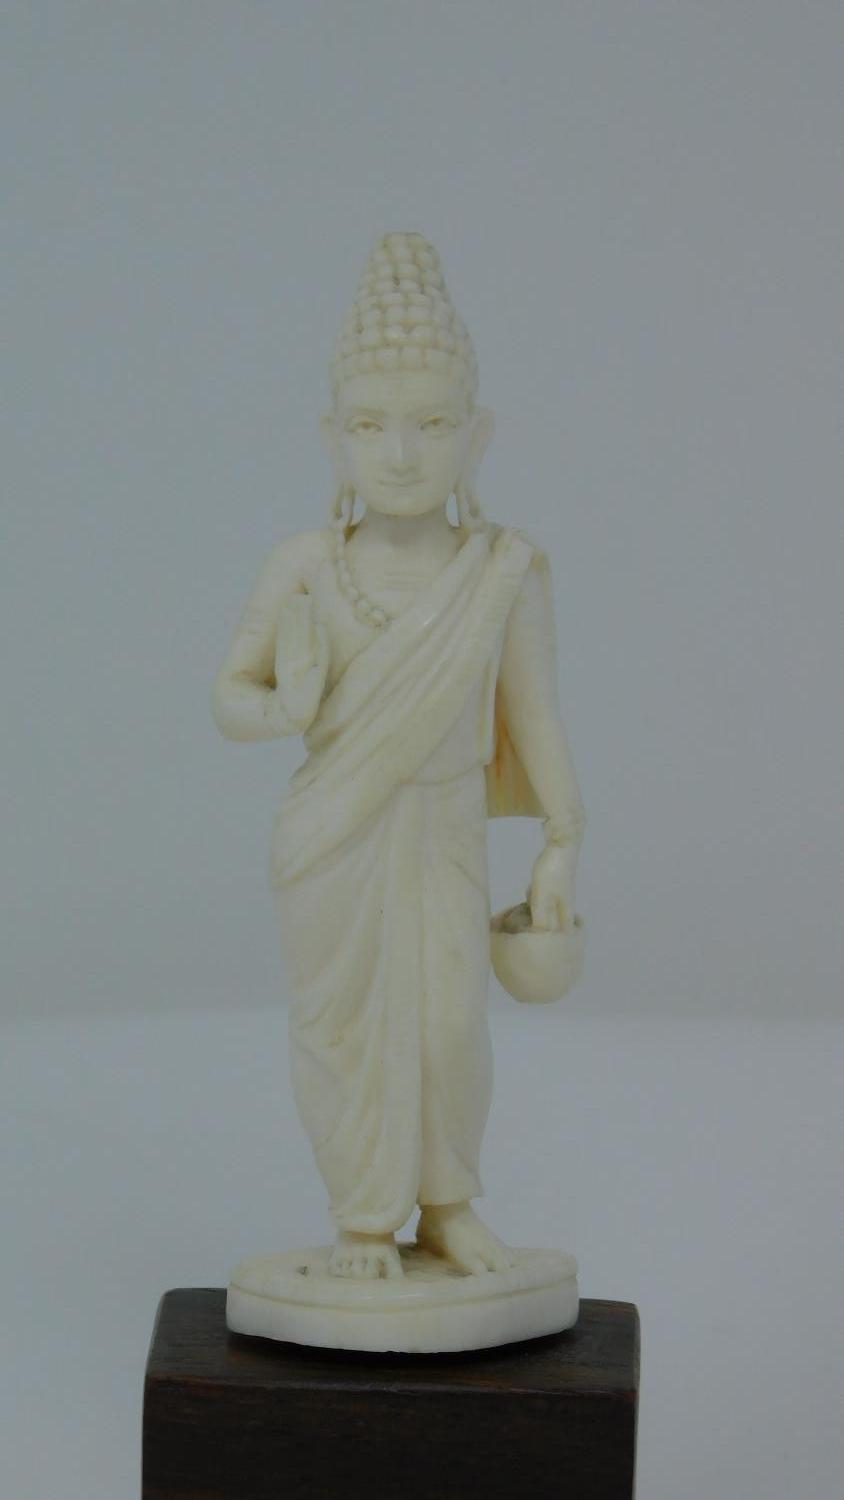 Two antique ivory carved statues, one of the buddha and one of a Hindu deity depicted holding a - Image 3 of 11